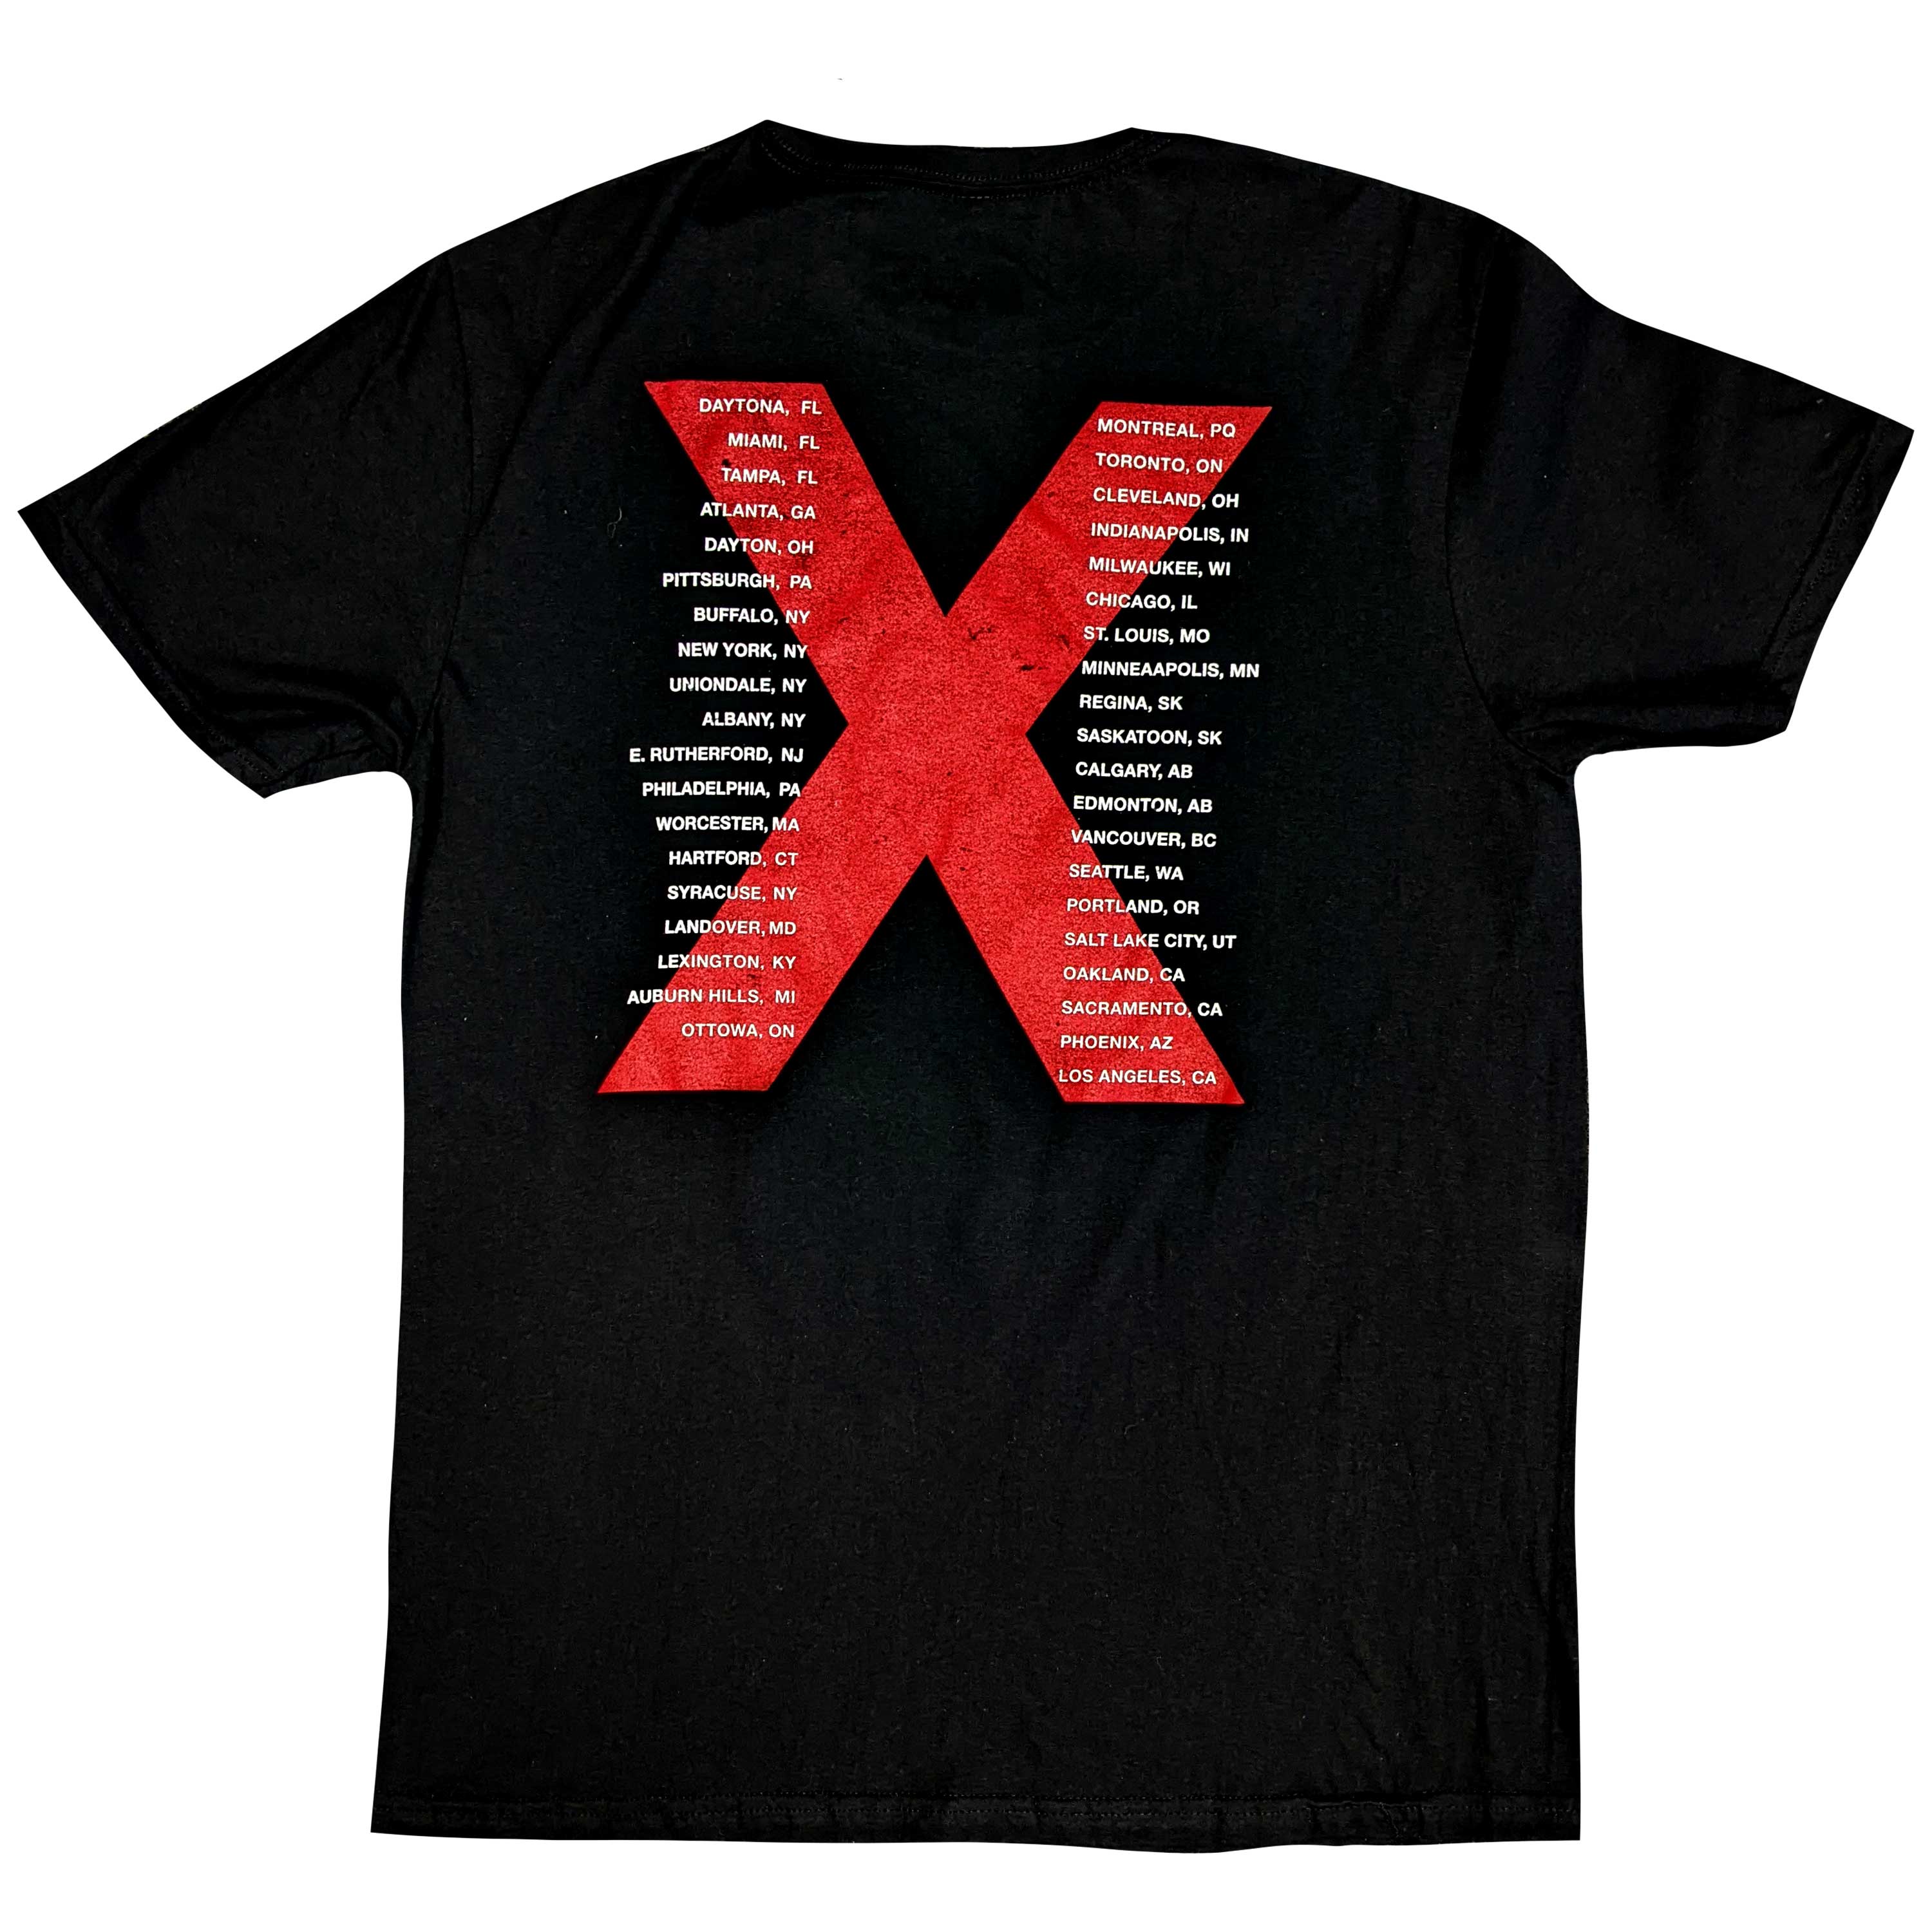 INXS Attractive T-Shirt, US Tour | Authentic Band Merch